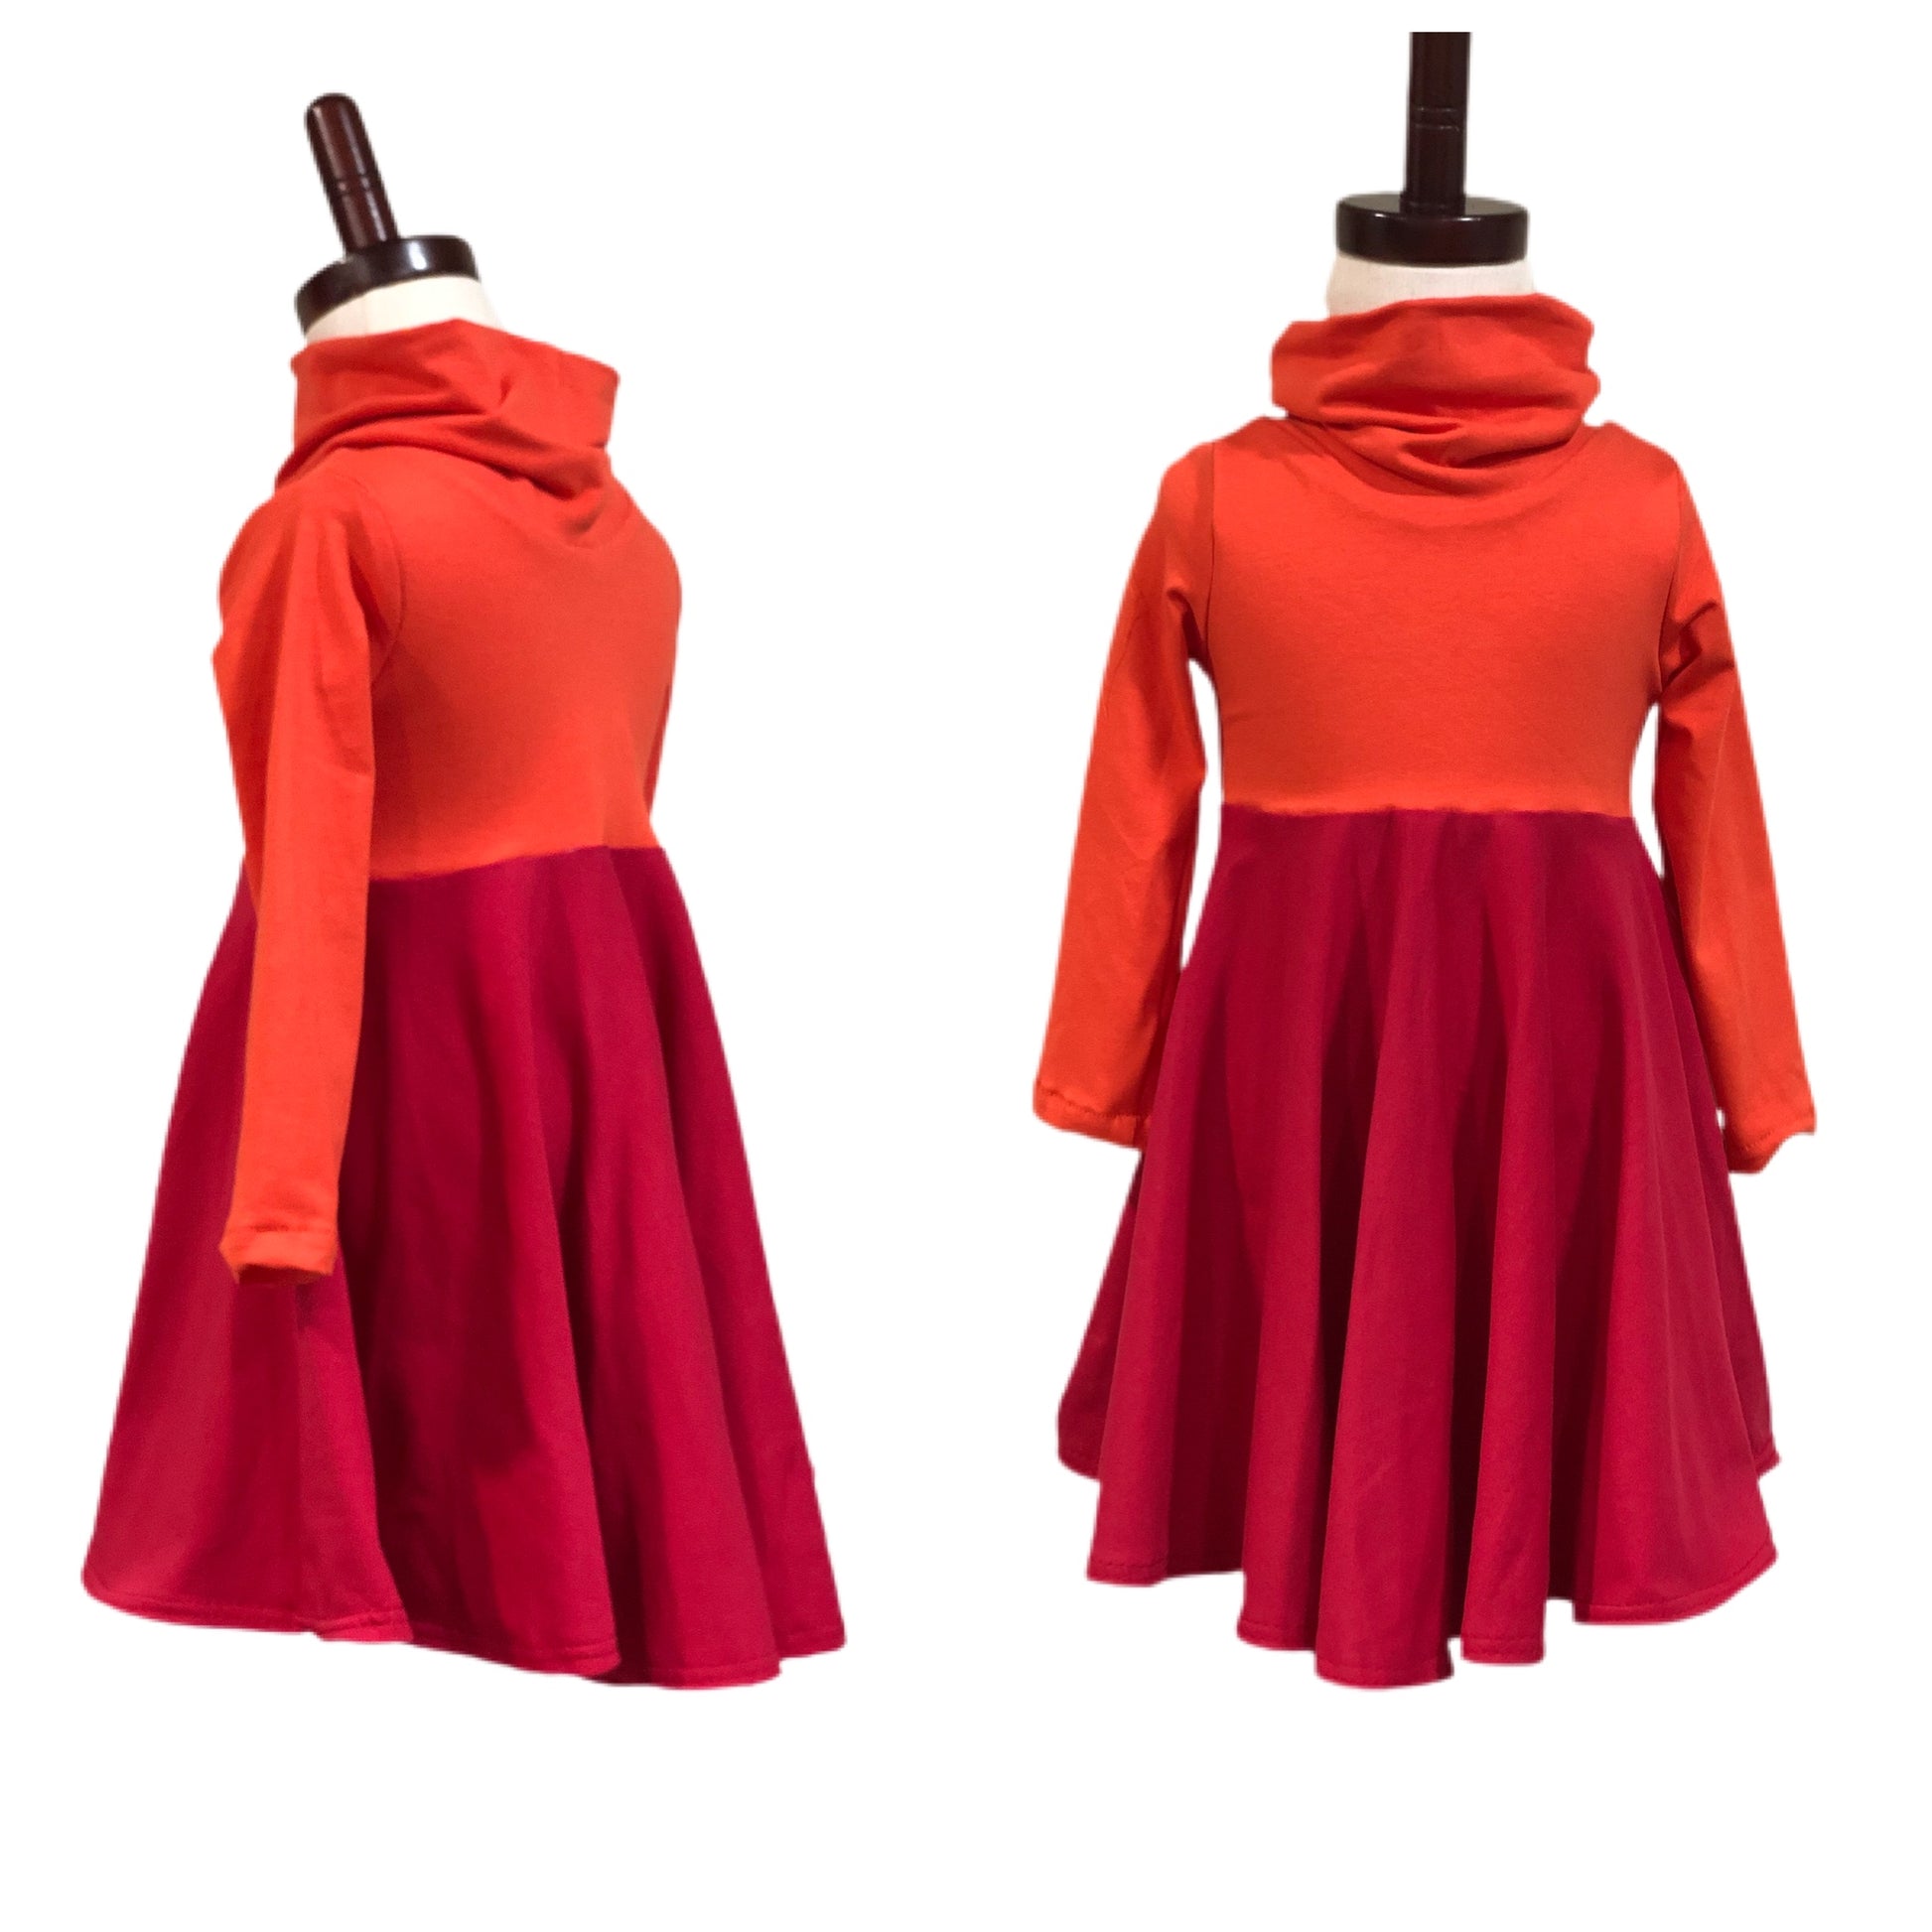 Velma Costume From Scooby Doo Gang – Flax and Wool Threads